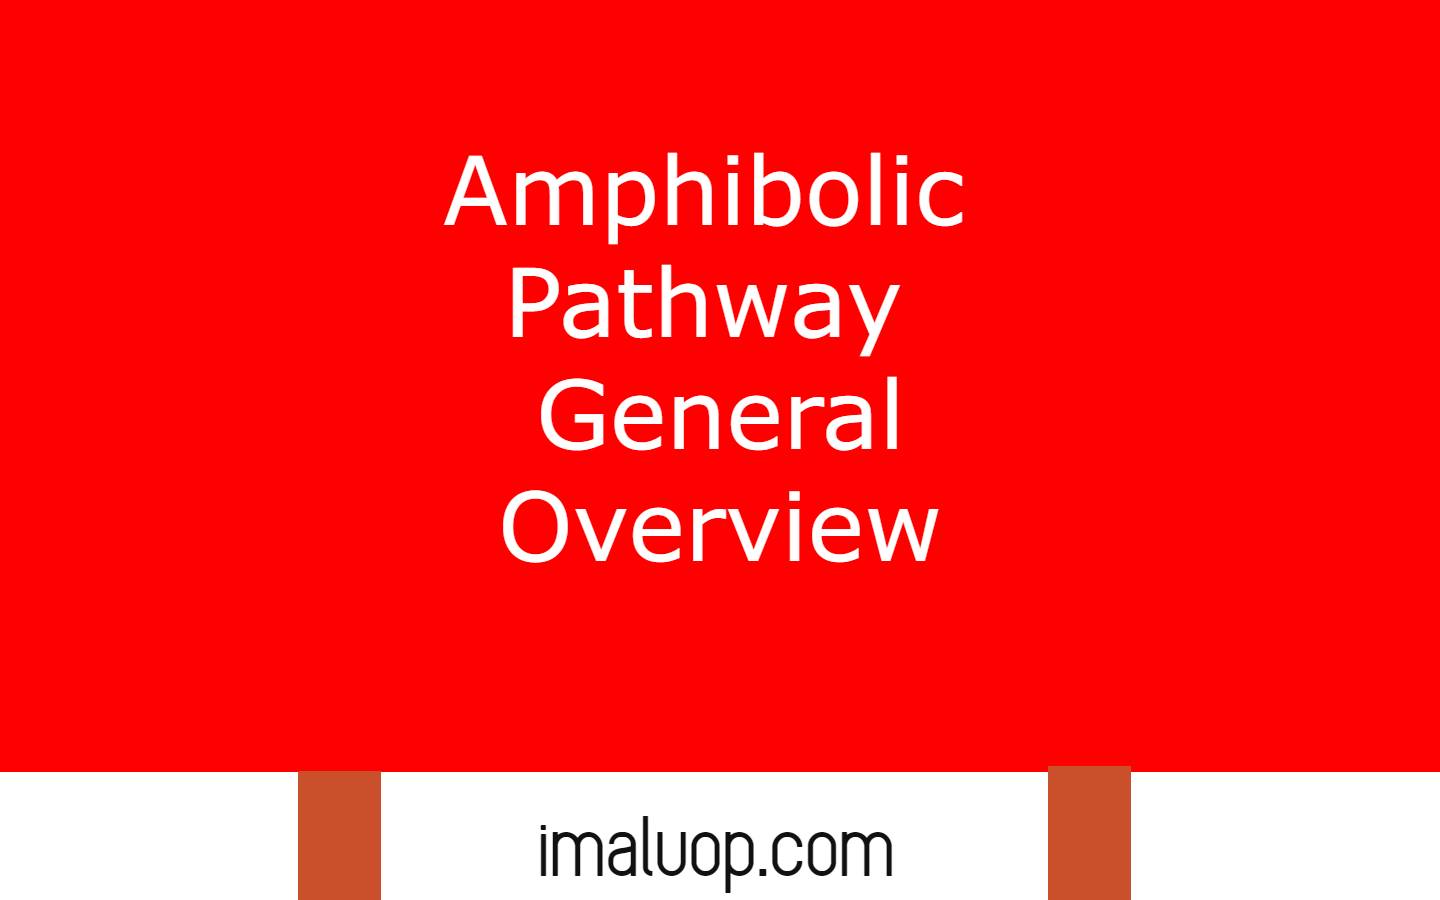 Amphibolic Pathway General Overview